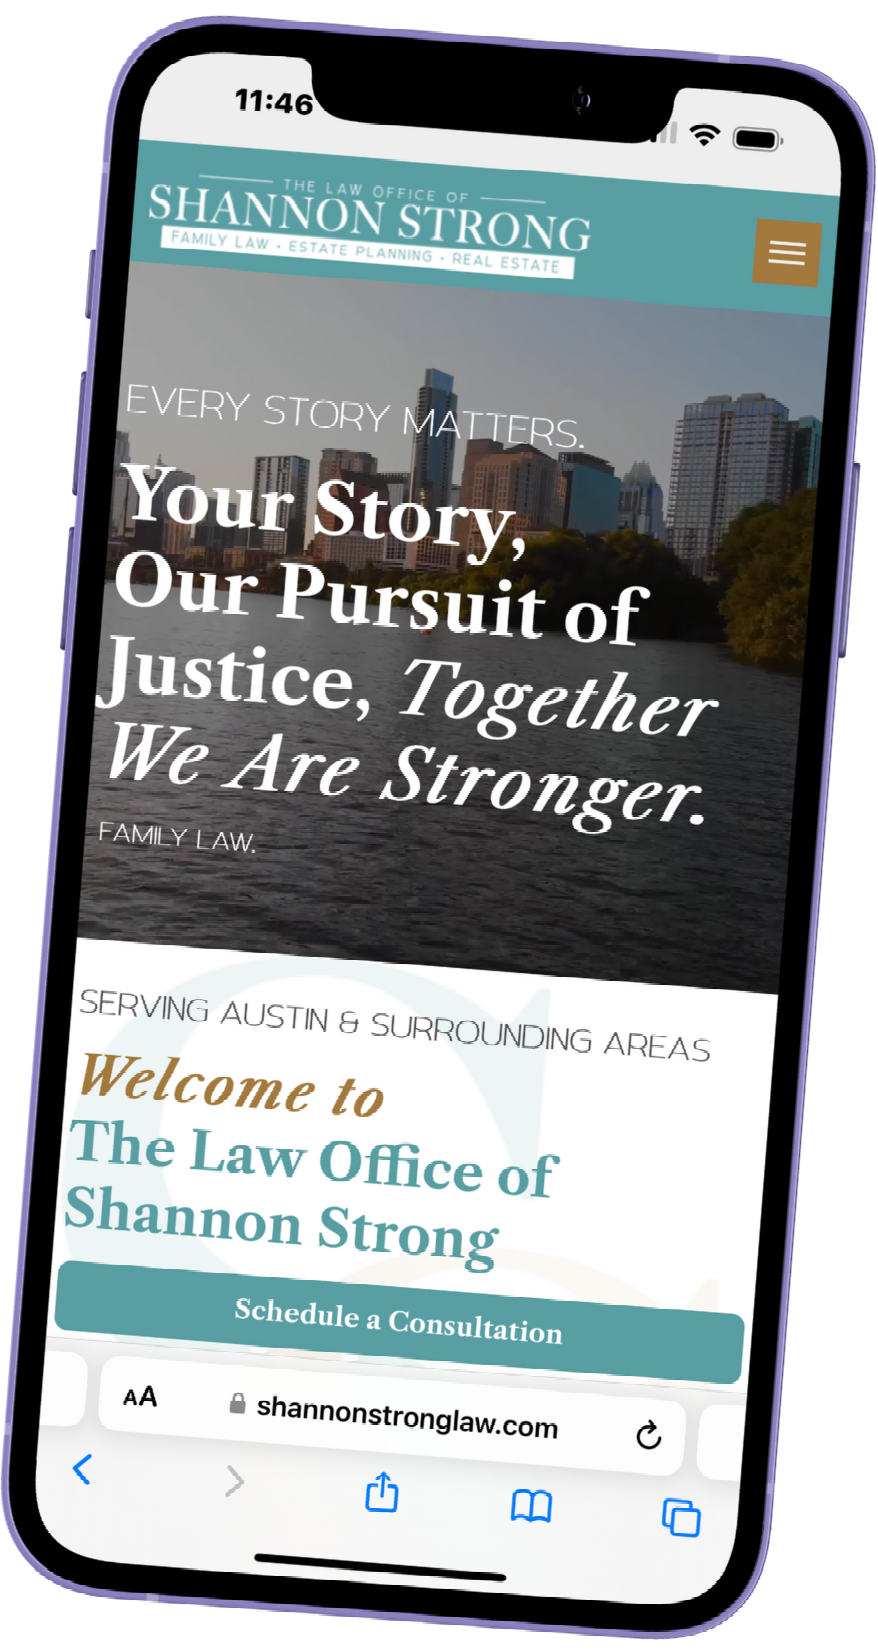 A shannon strong law firm website is displayed on a cell phone.